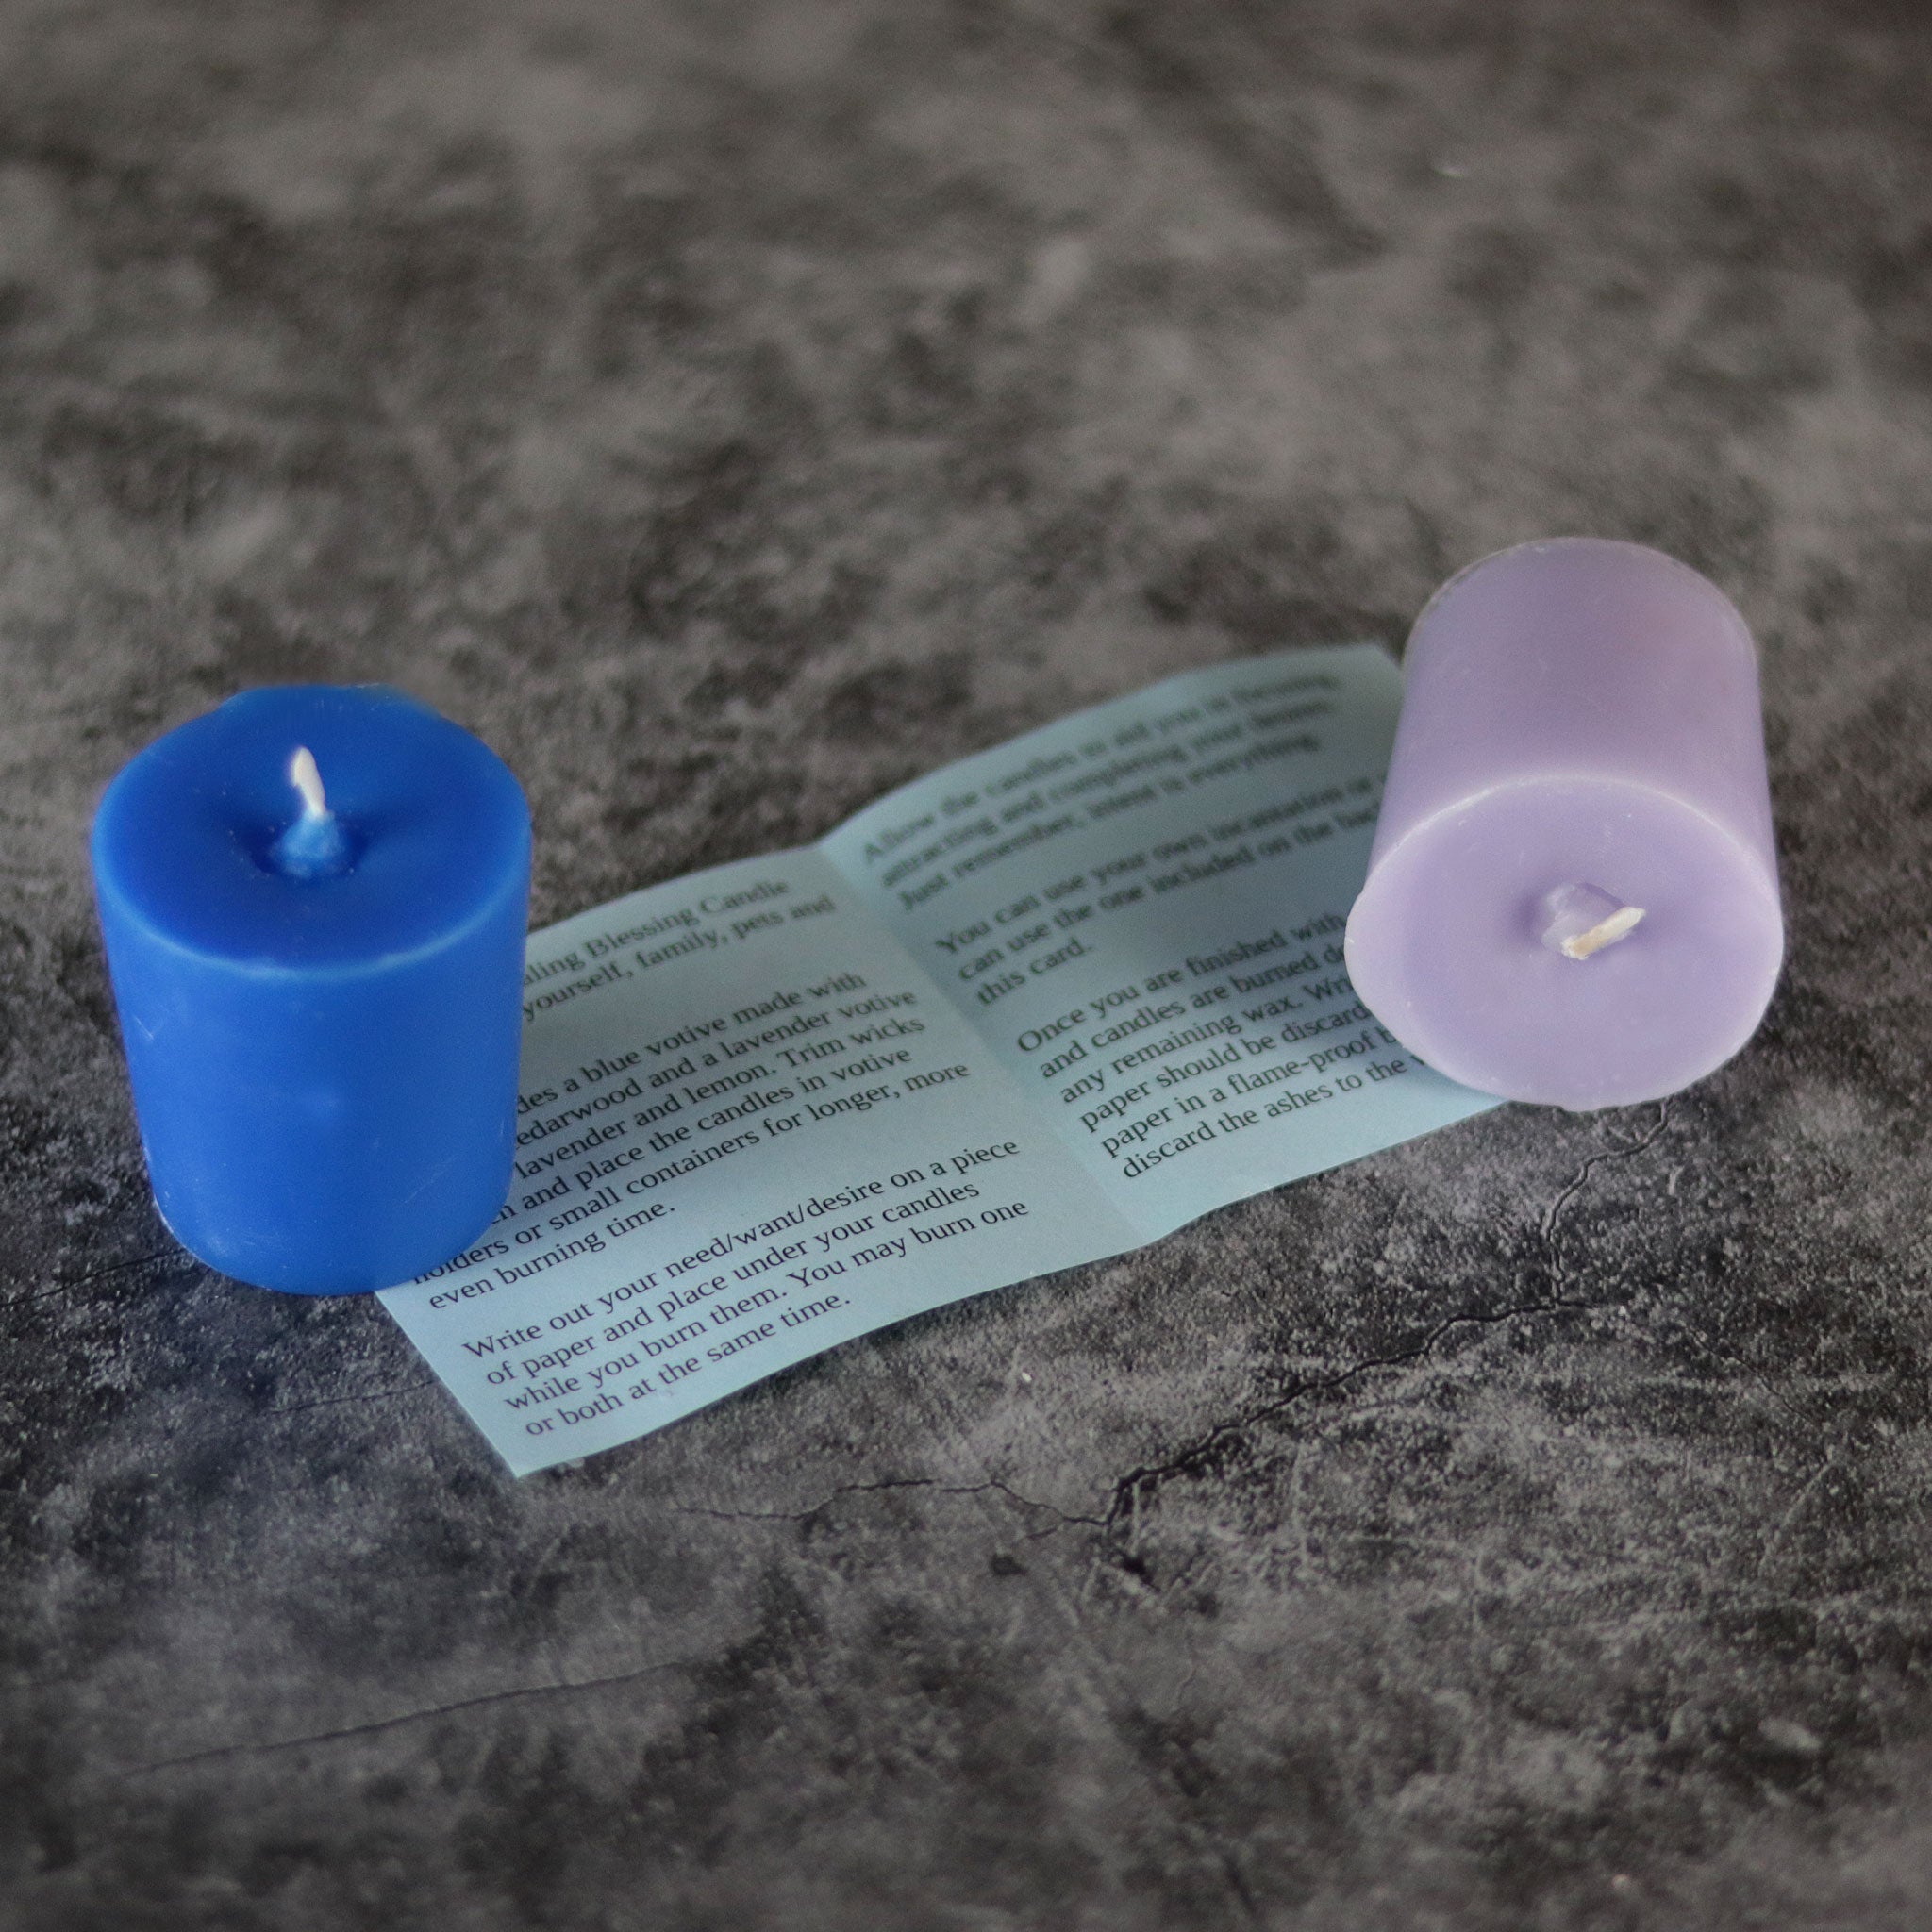 Health and Healing Blessing Candle Kit - 13 Moons